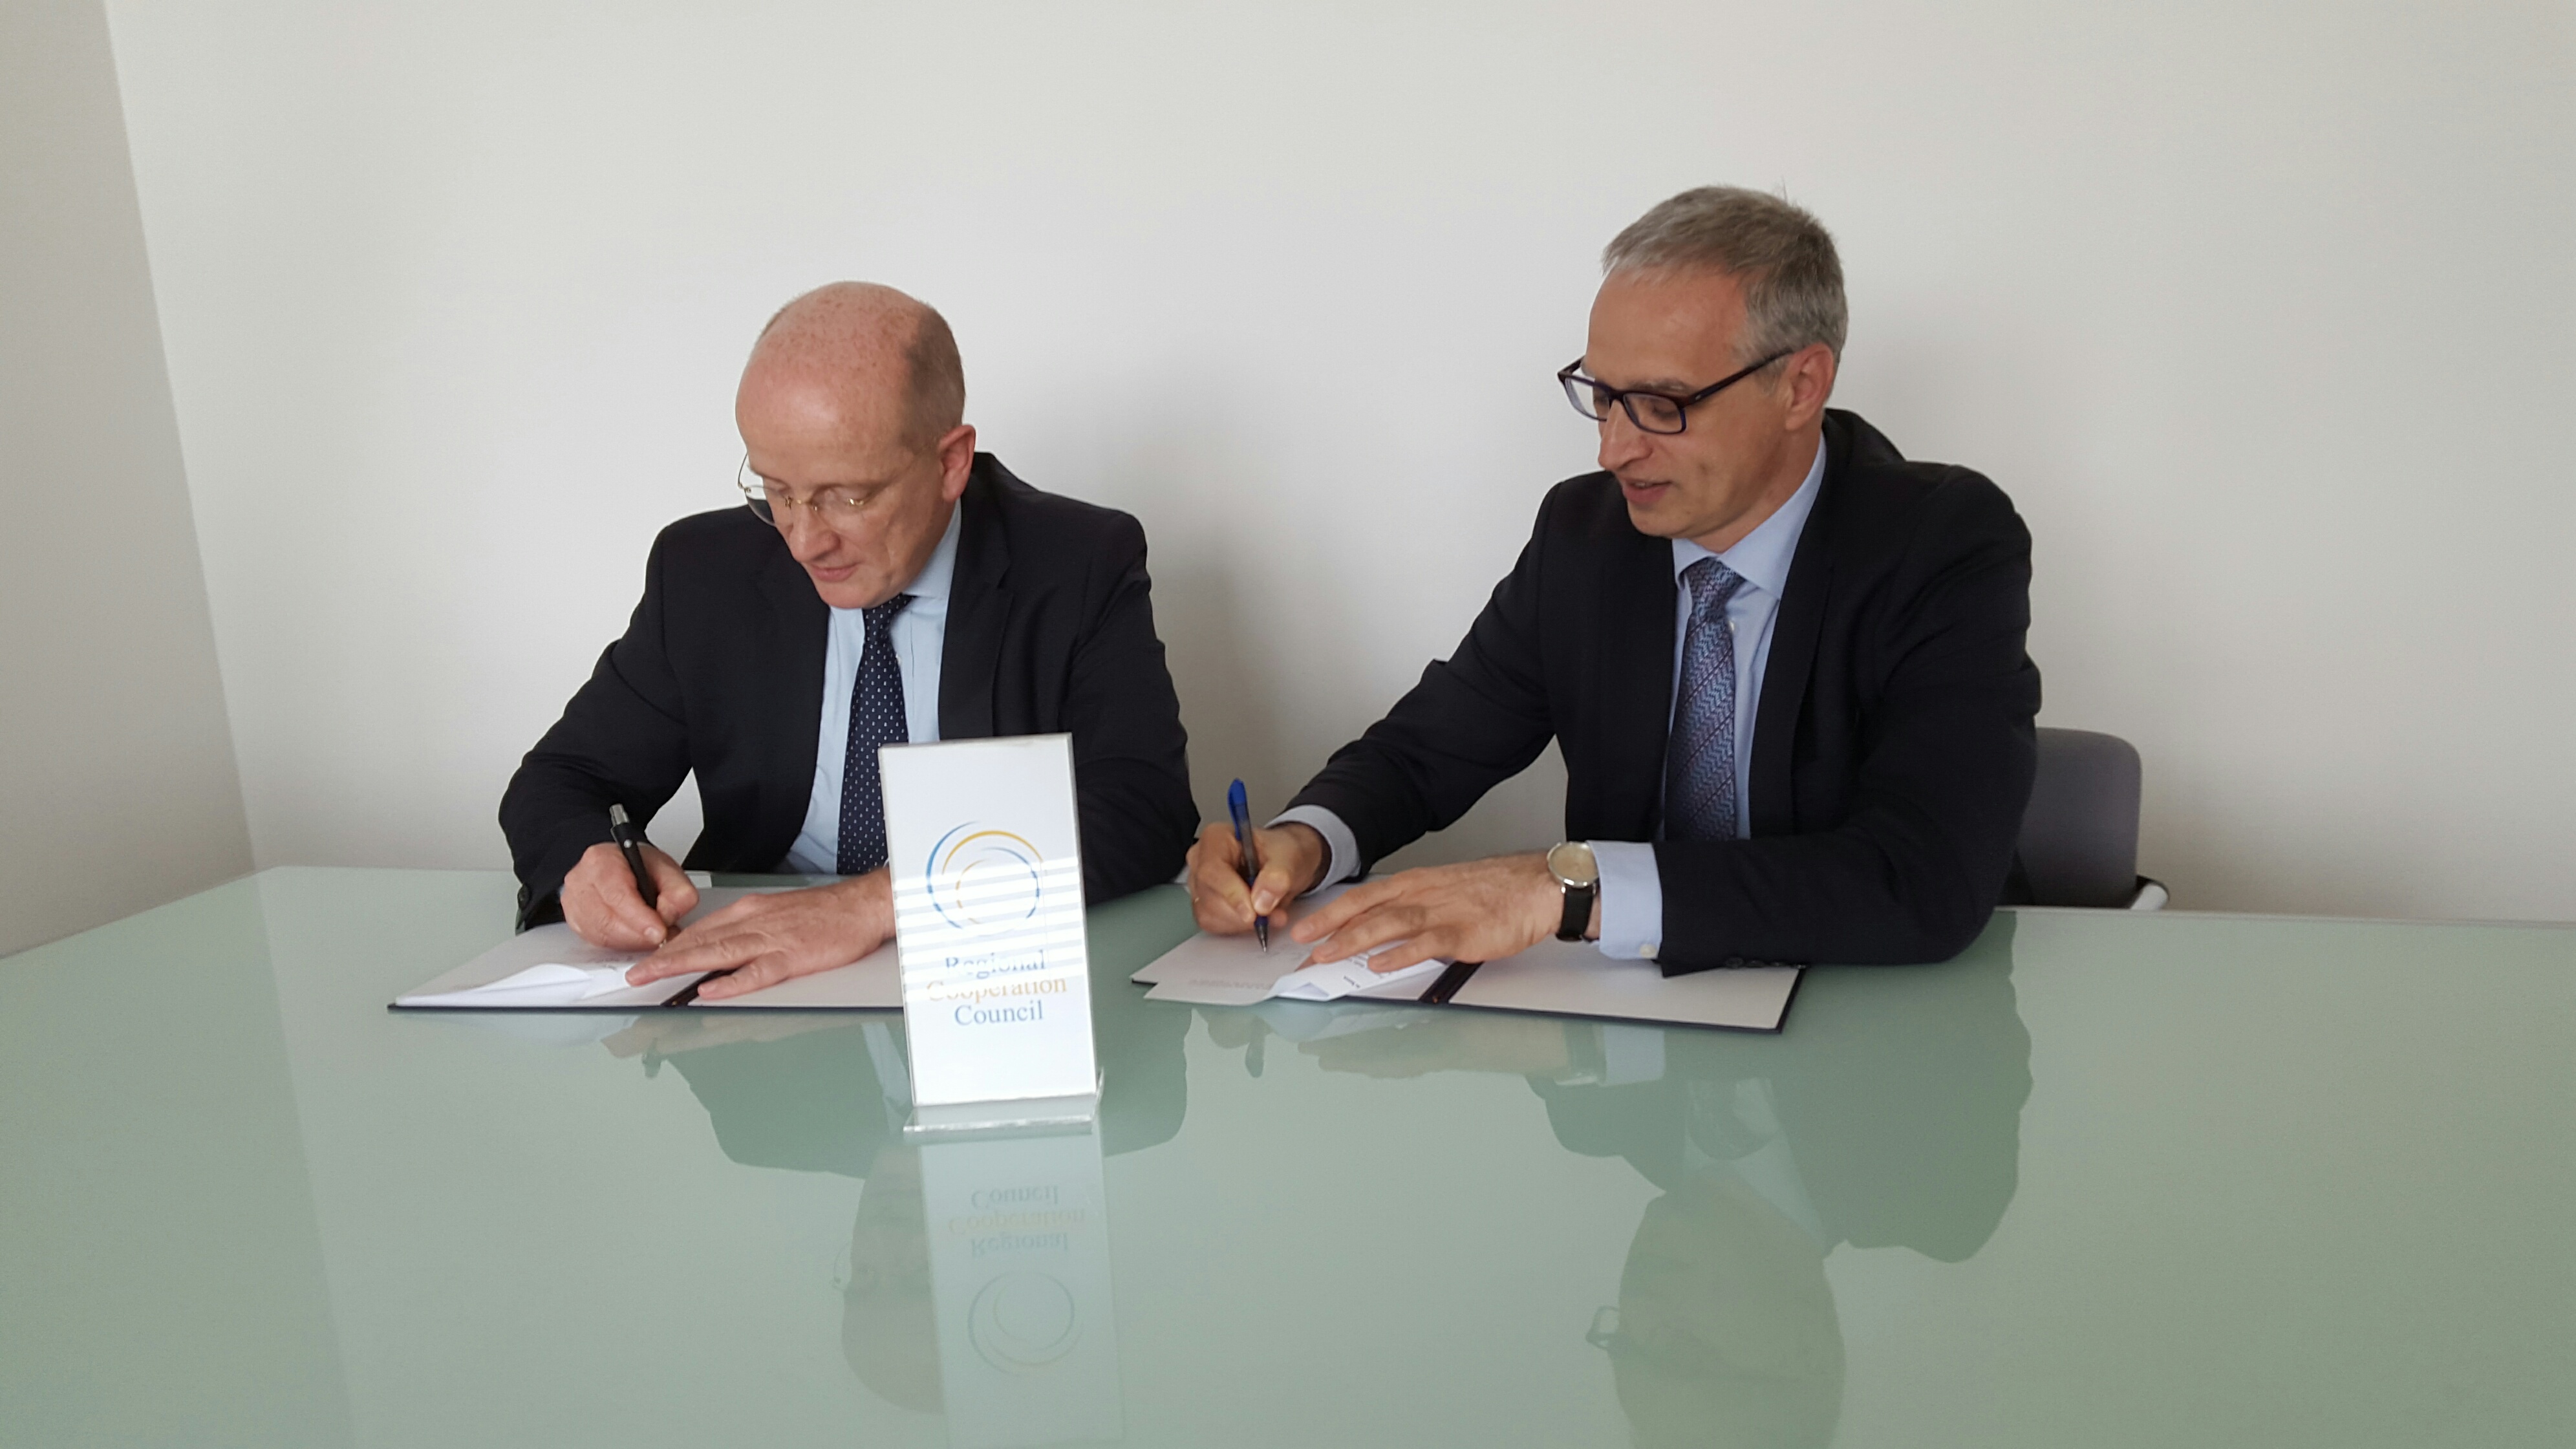 Goran Svilanovic, RCC Secretary General (right), and Christian Hellbach, German Ambassador to Bosnia and Herzegovina, sign a 50,000 euro grant agreement supporting activities of the RCC, in Sarajevo on 6 April 2016. (Photo: RCC/Selma Ahatovic-Lihic)